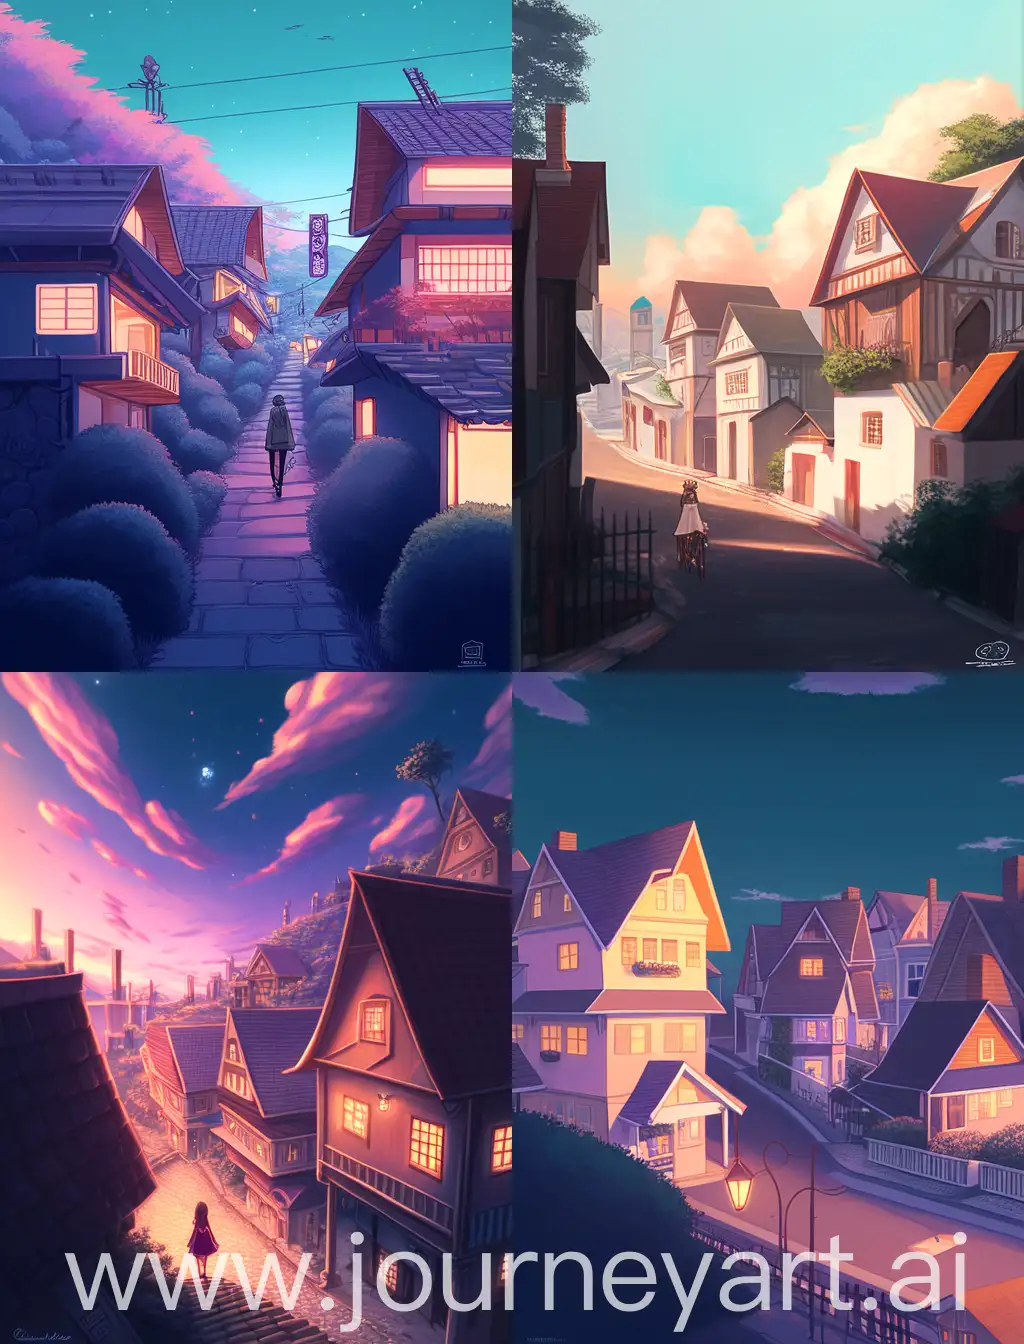 There are 3 small houses in a row on the right, a man stands to the left of the houses and looks at the houses, a question mark is depicted between him and the houses